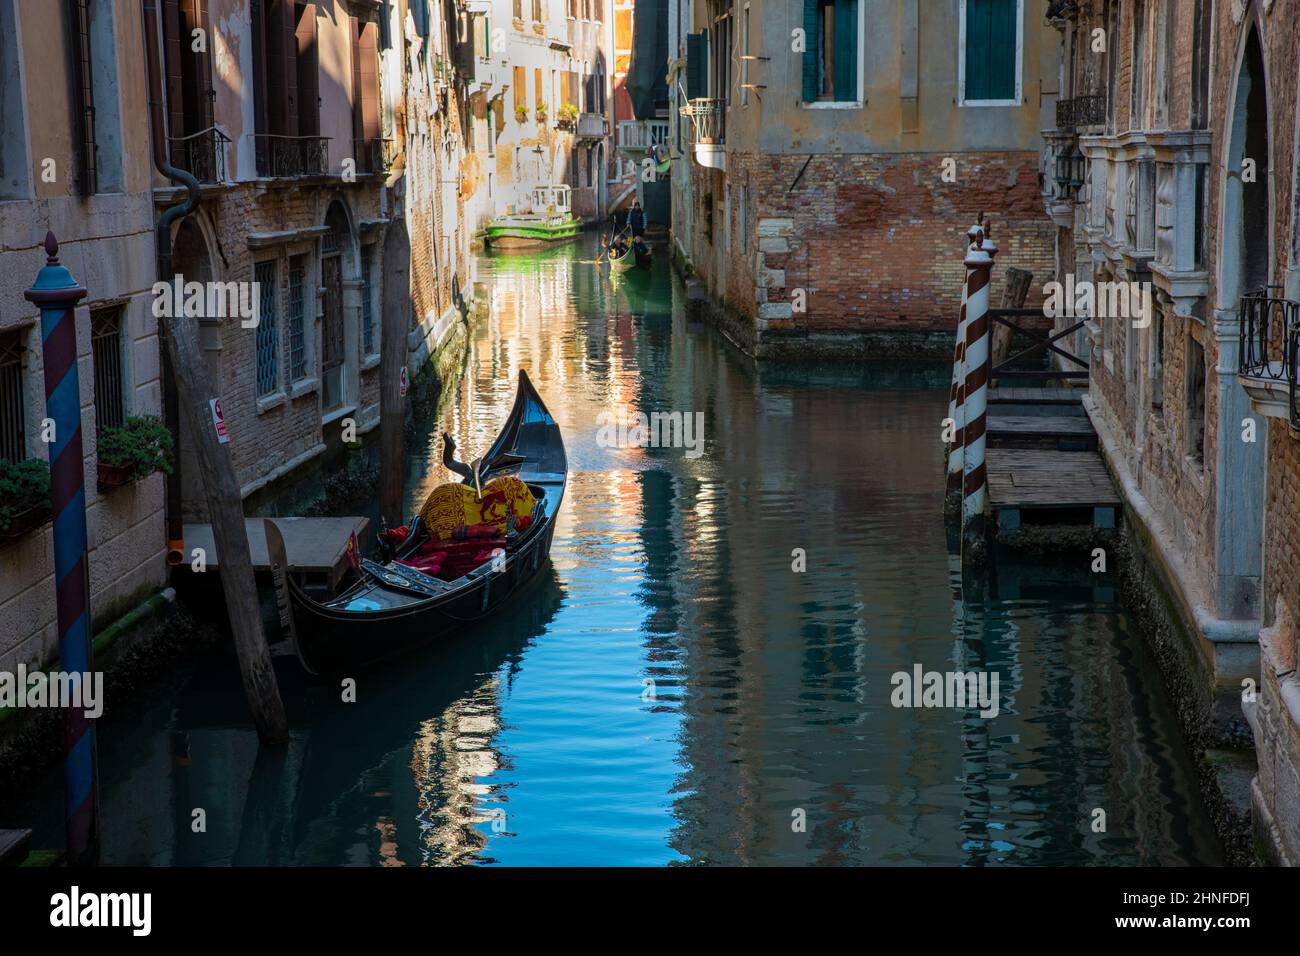 Reflections on water in side canal , Venice Stock Photo